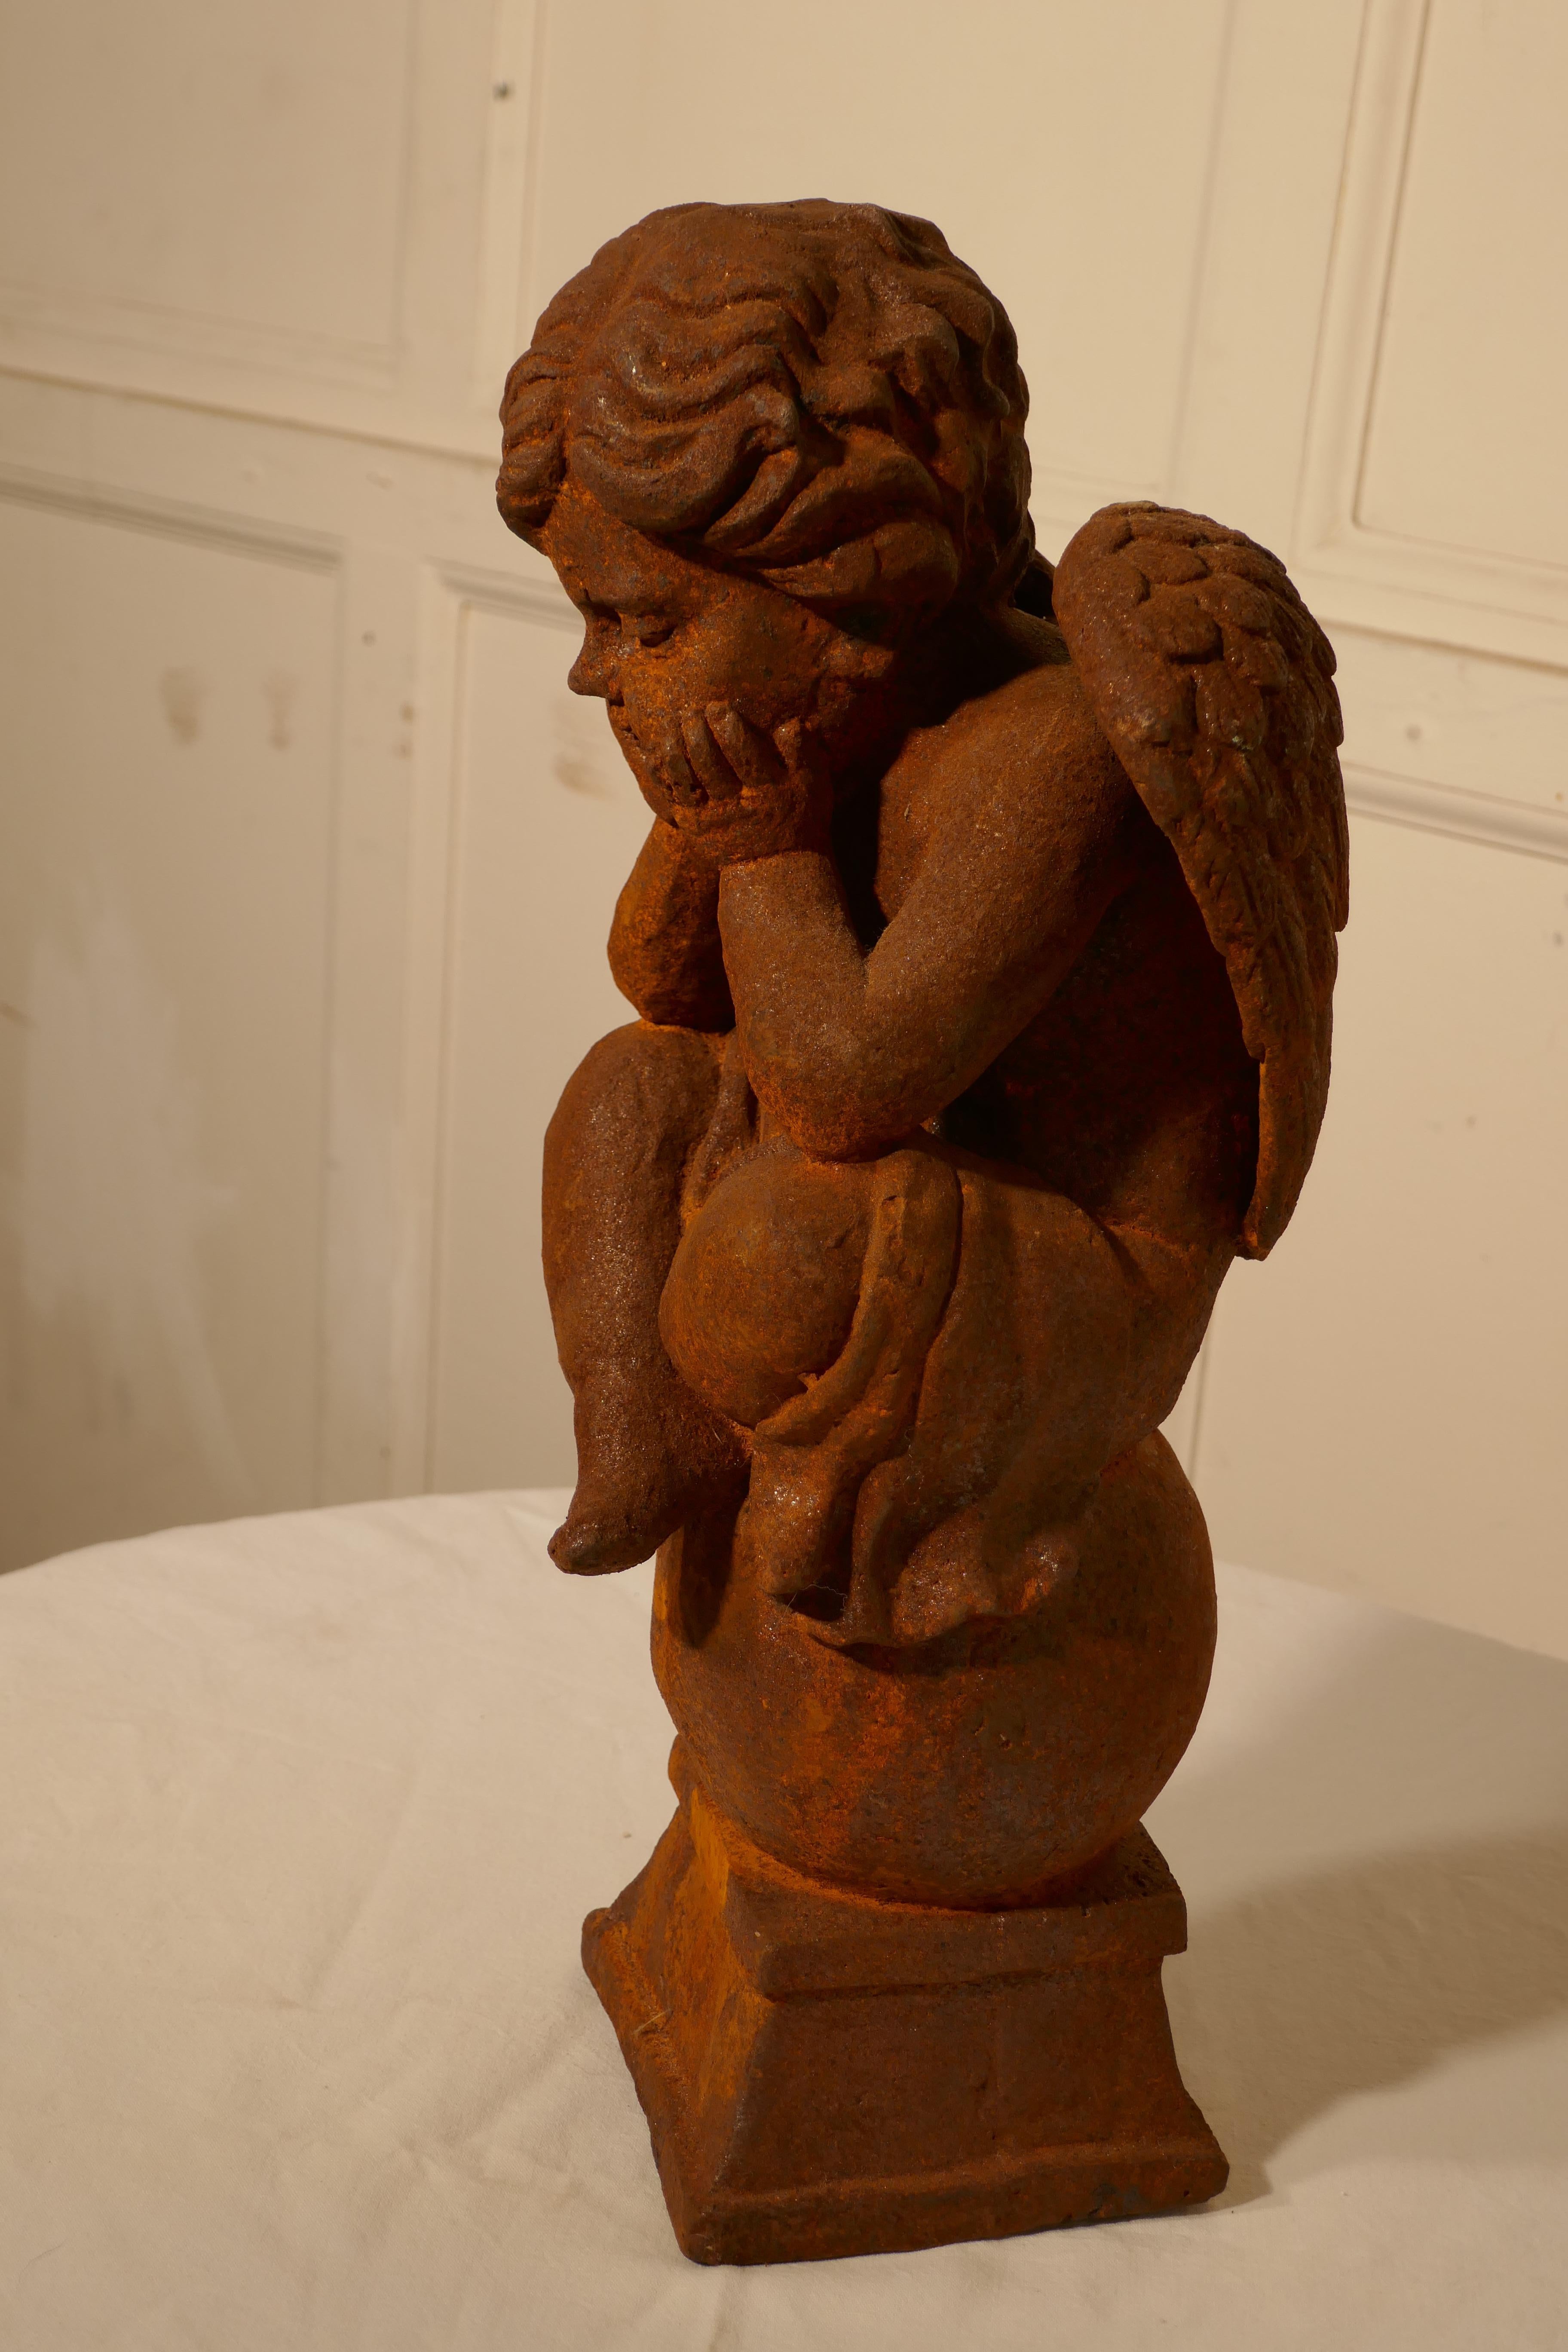 19th century French cast iron angel, putti deep in thought

A charming piece, this little Angel is cast iron, and so very heavy, he sits in a pose of contemplation with his head resting on his hands 
The digure is 16” tall and the base os 5”